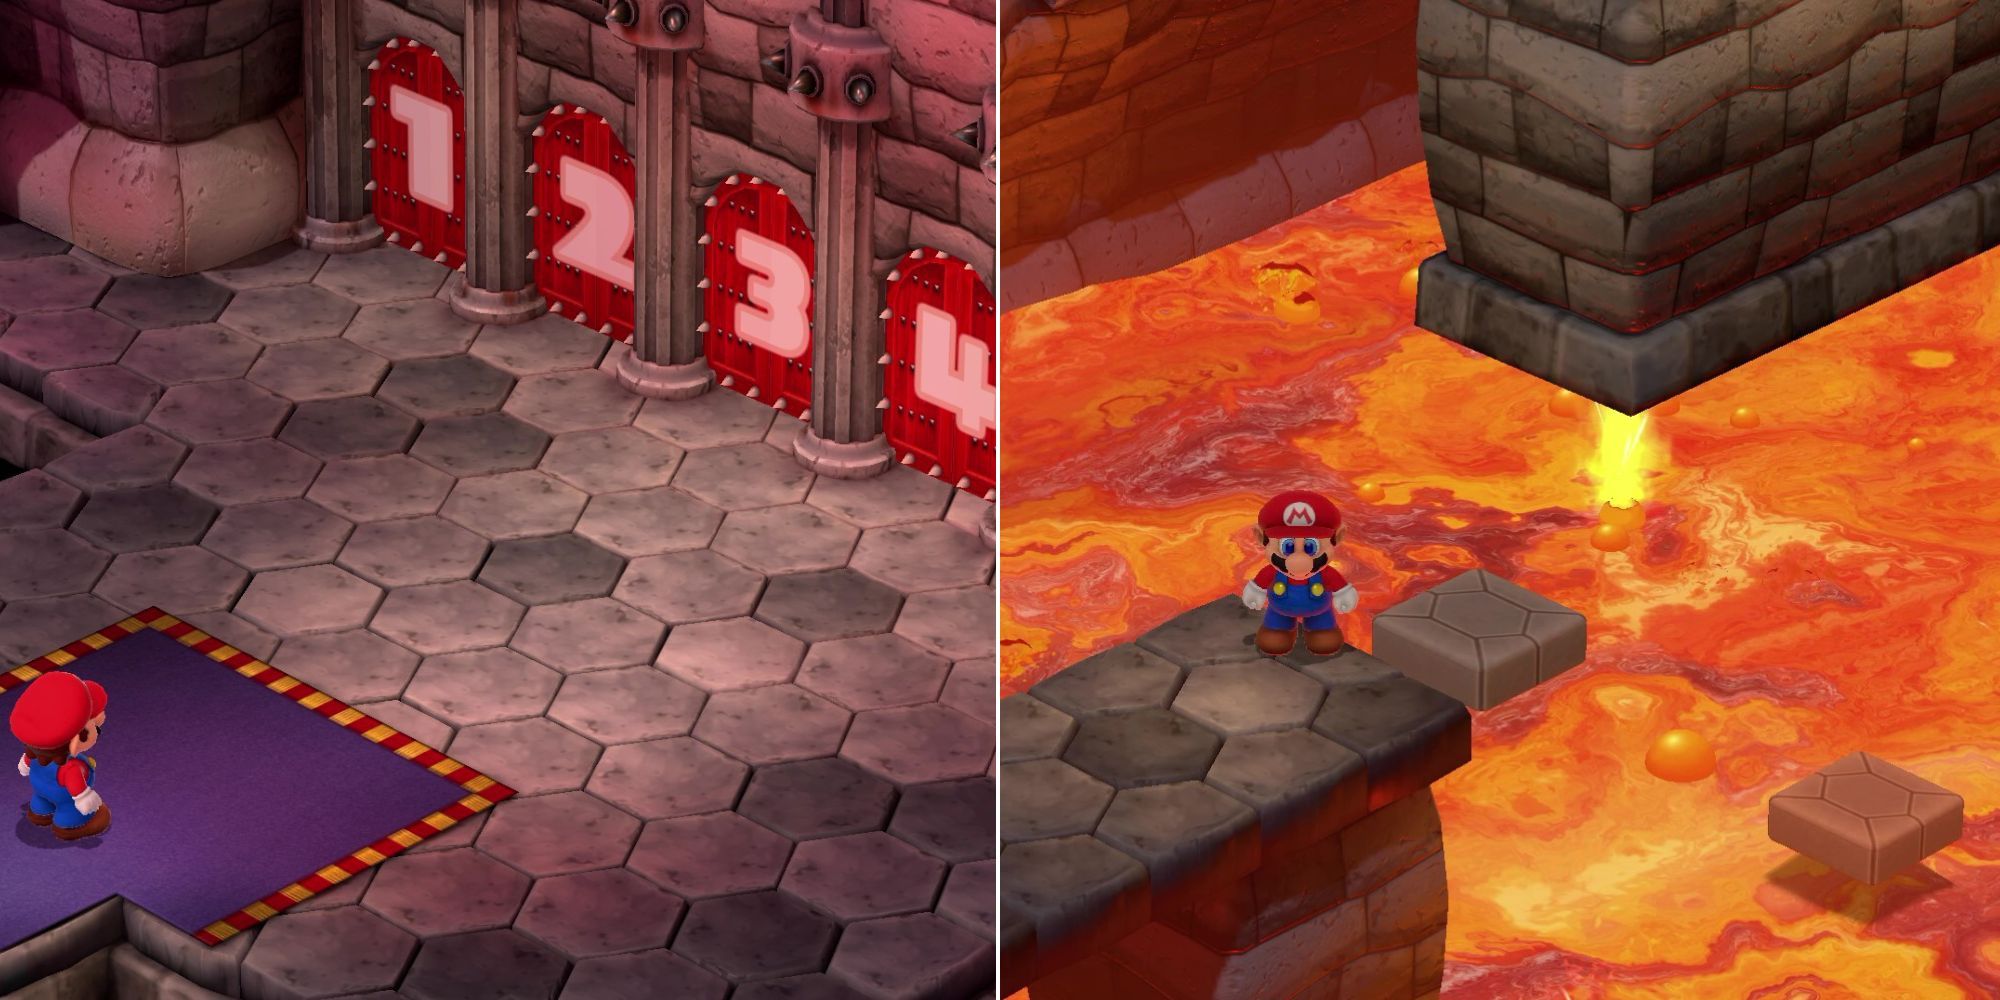 A split image of the puzzle section from Bowser's Keep in Super Mario RPG